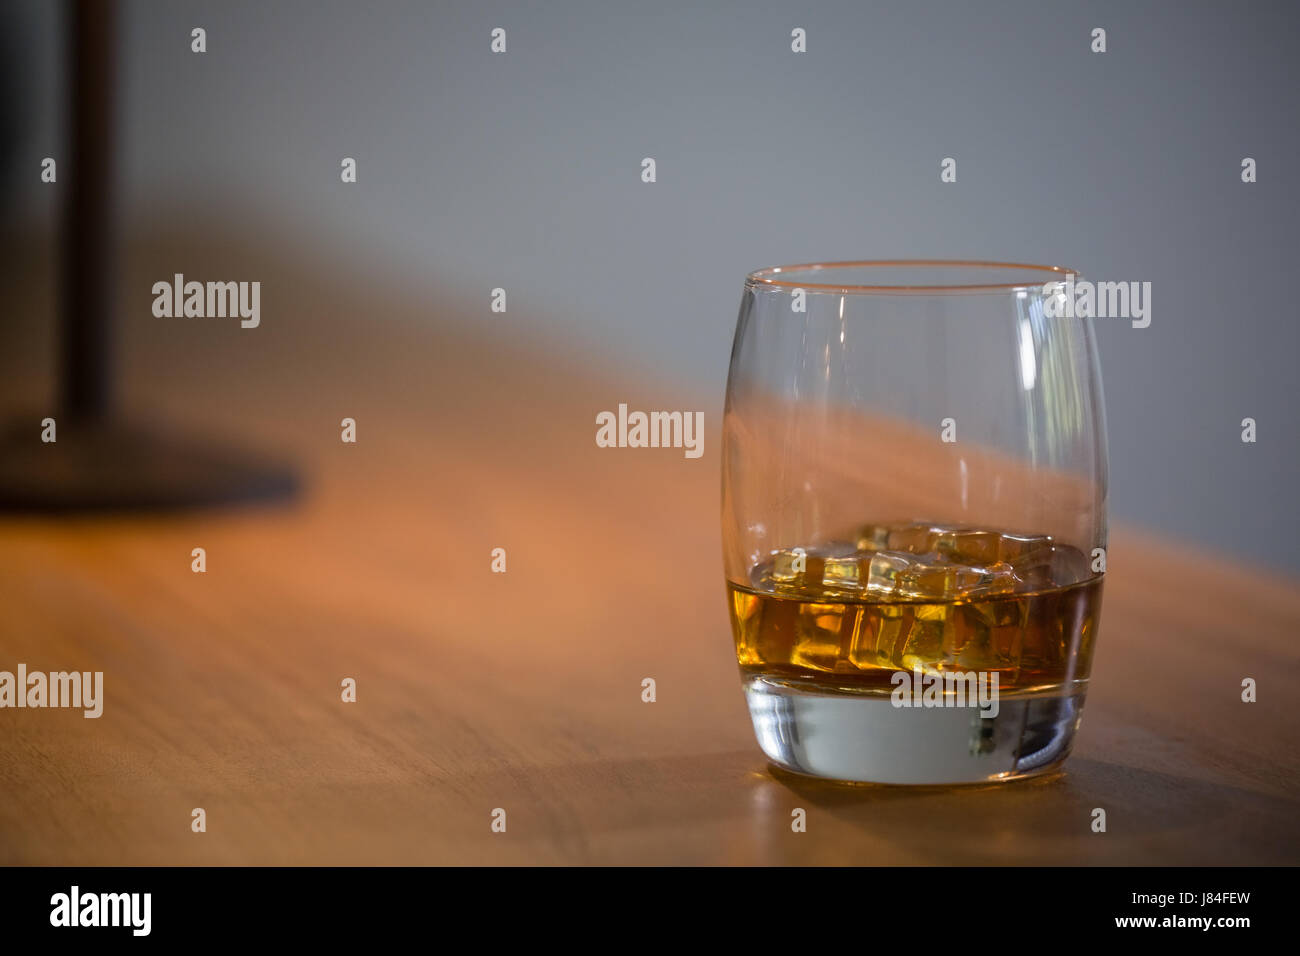 Close up of beer glass with ice cubes on table Stock Photo